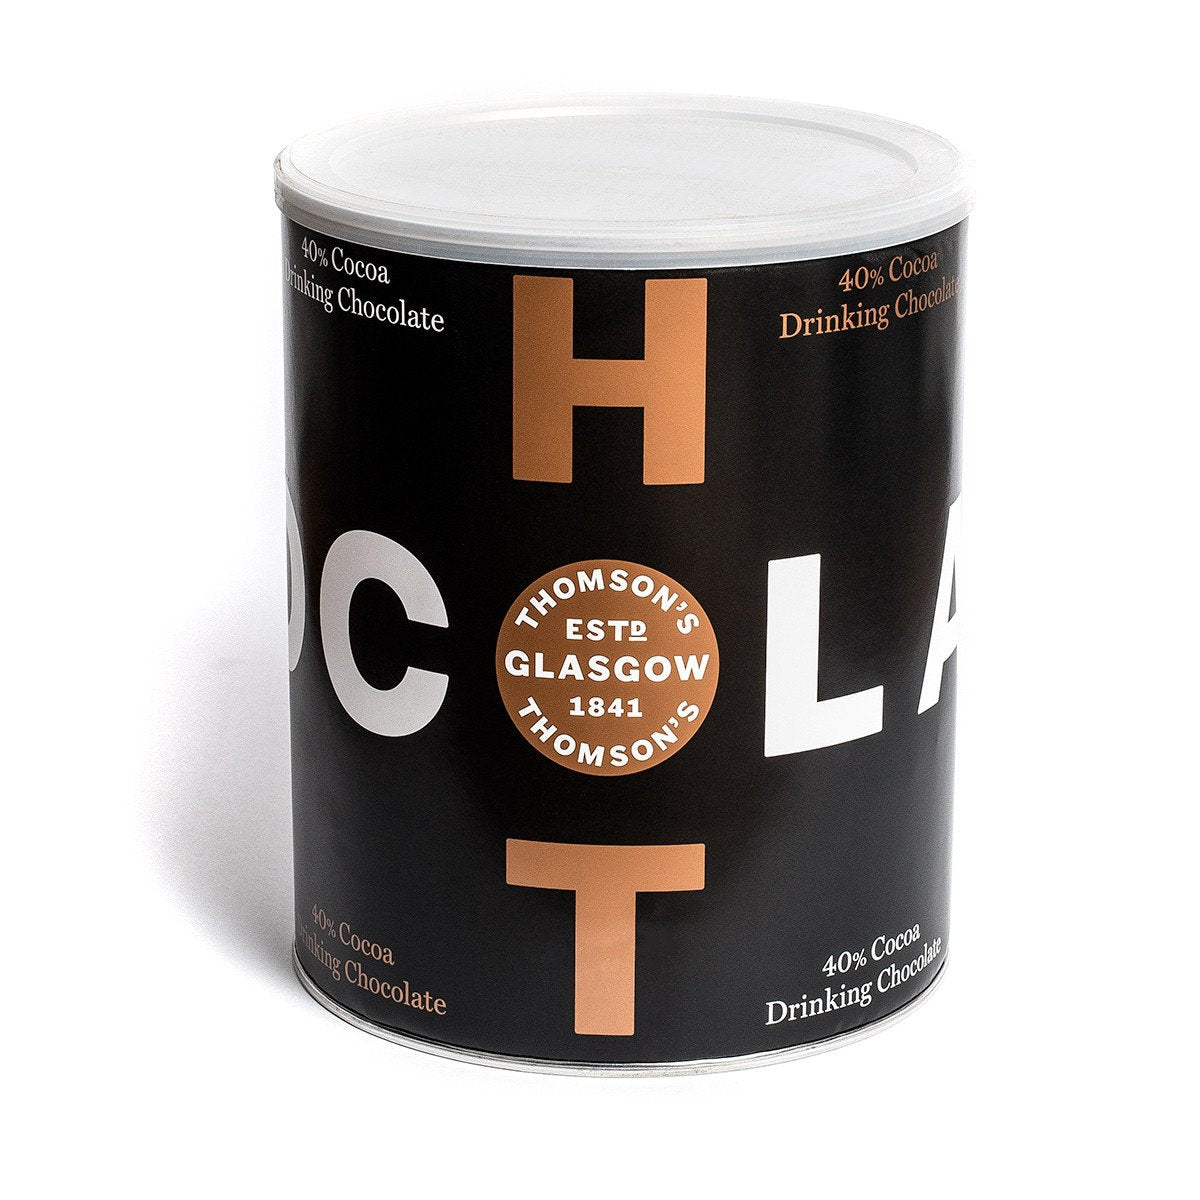 Thomson's 40% Cocoa Drinking Hot Chocolate 2KG